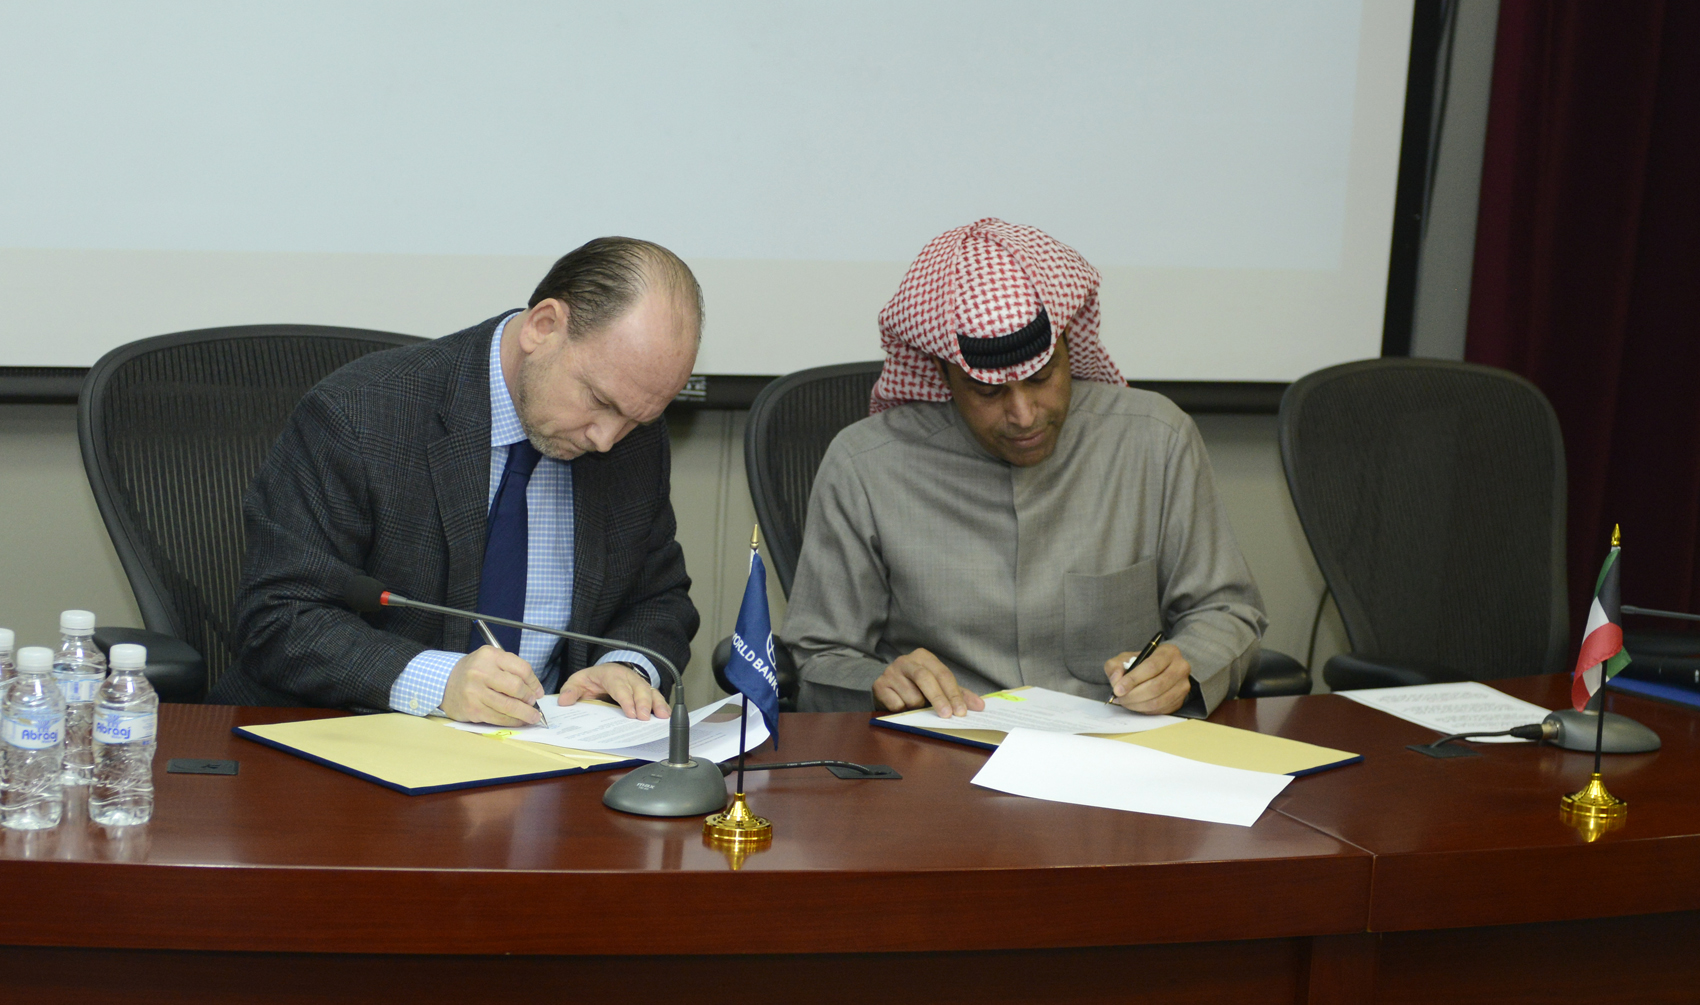 Kuwait's Ministry of Commerce and Industry partnered with World Bank Group (WBG) as part of a concrete plan designed to boost Kuwait's trade ties with neighboring countries and the rest of the world